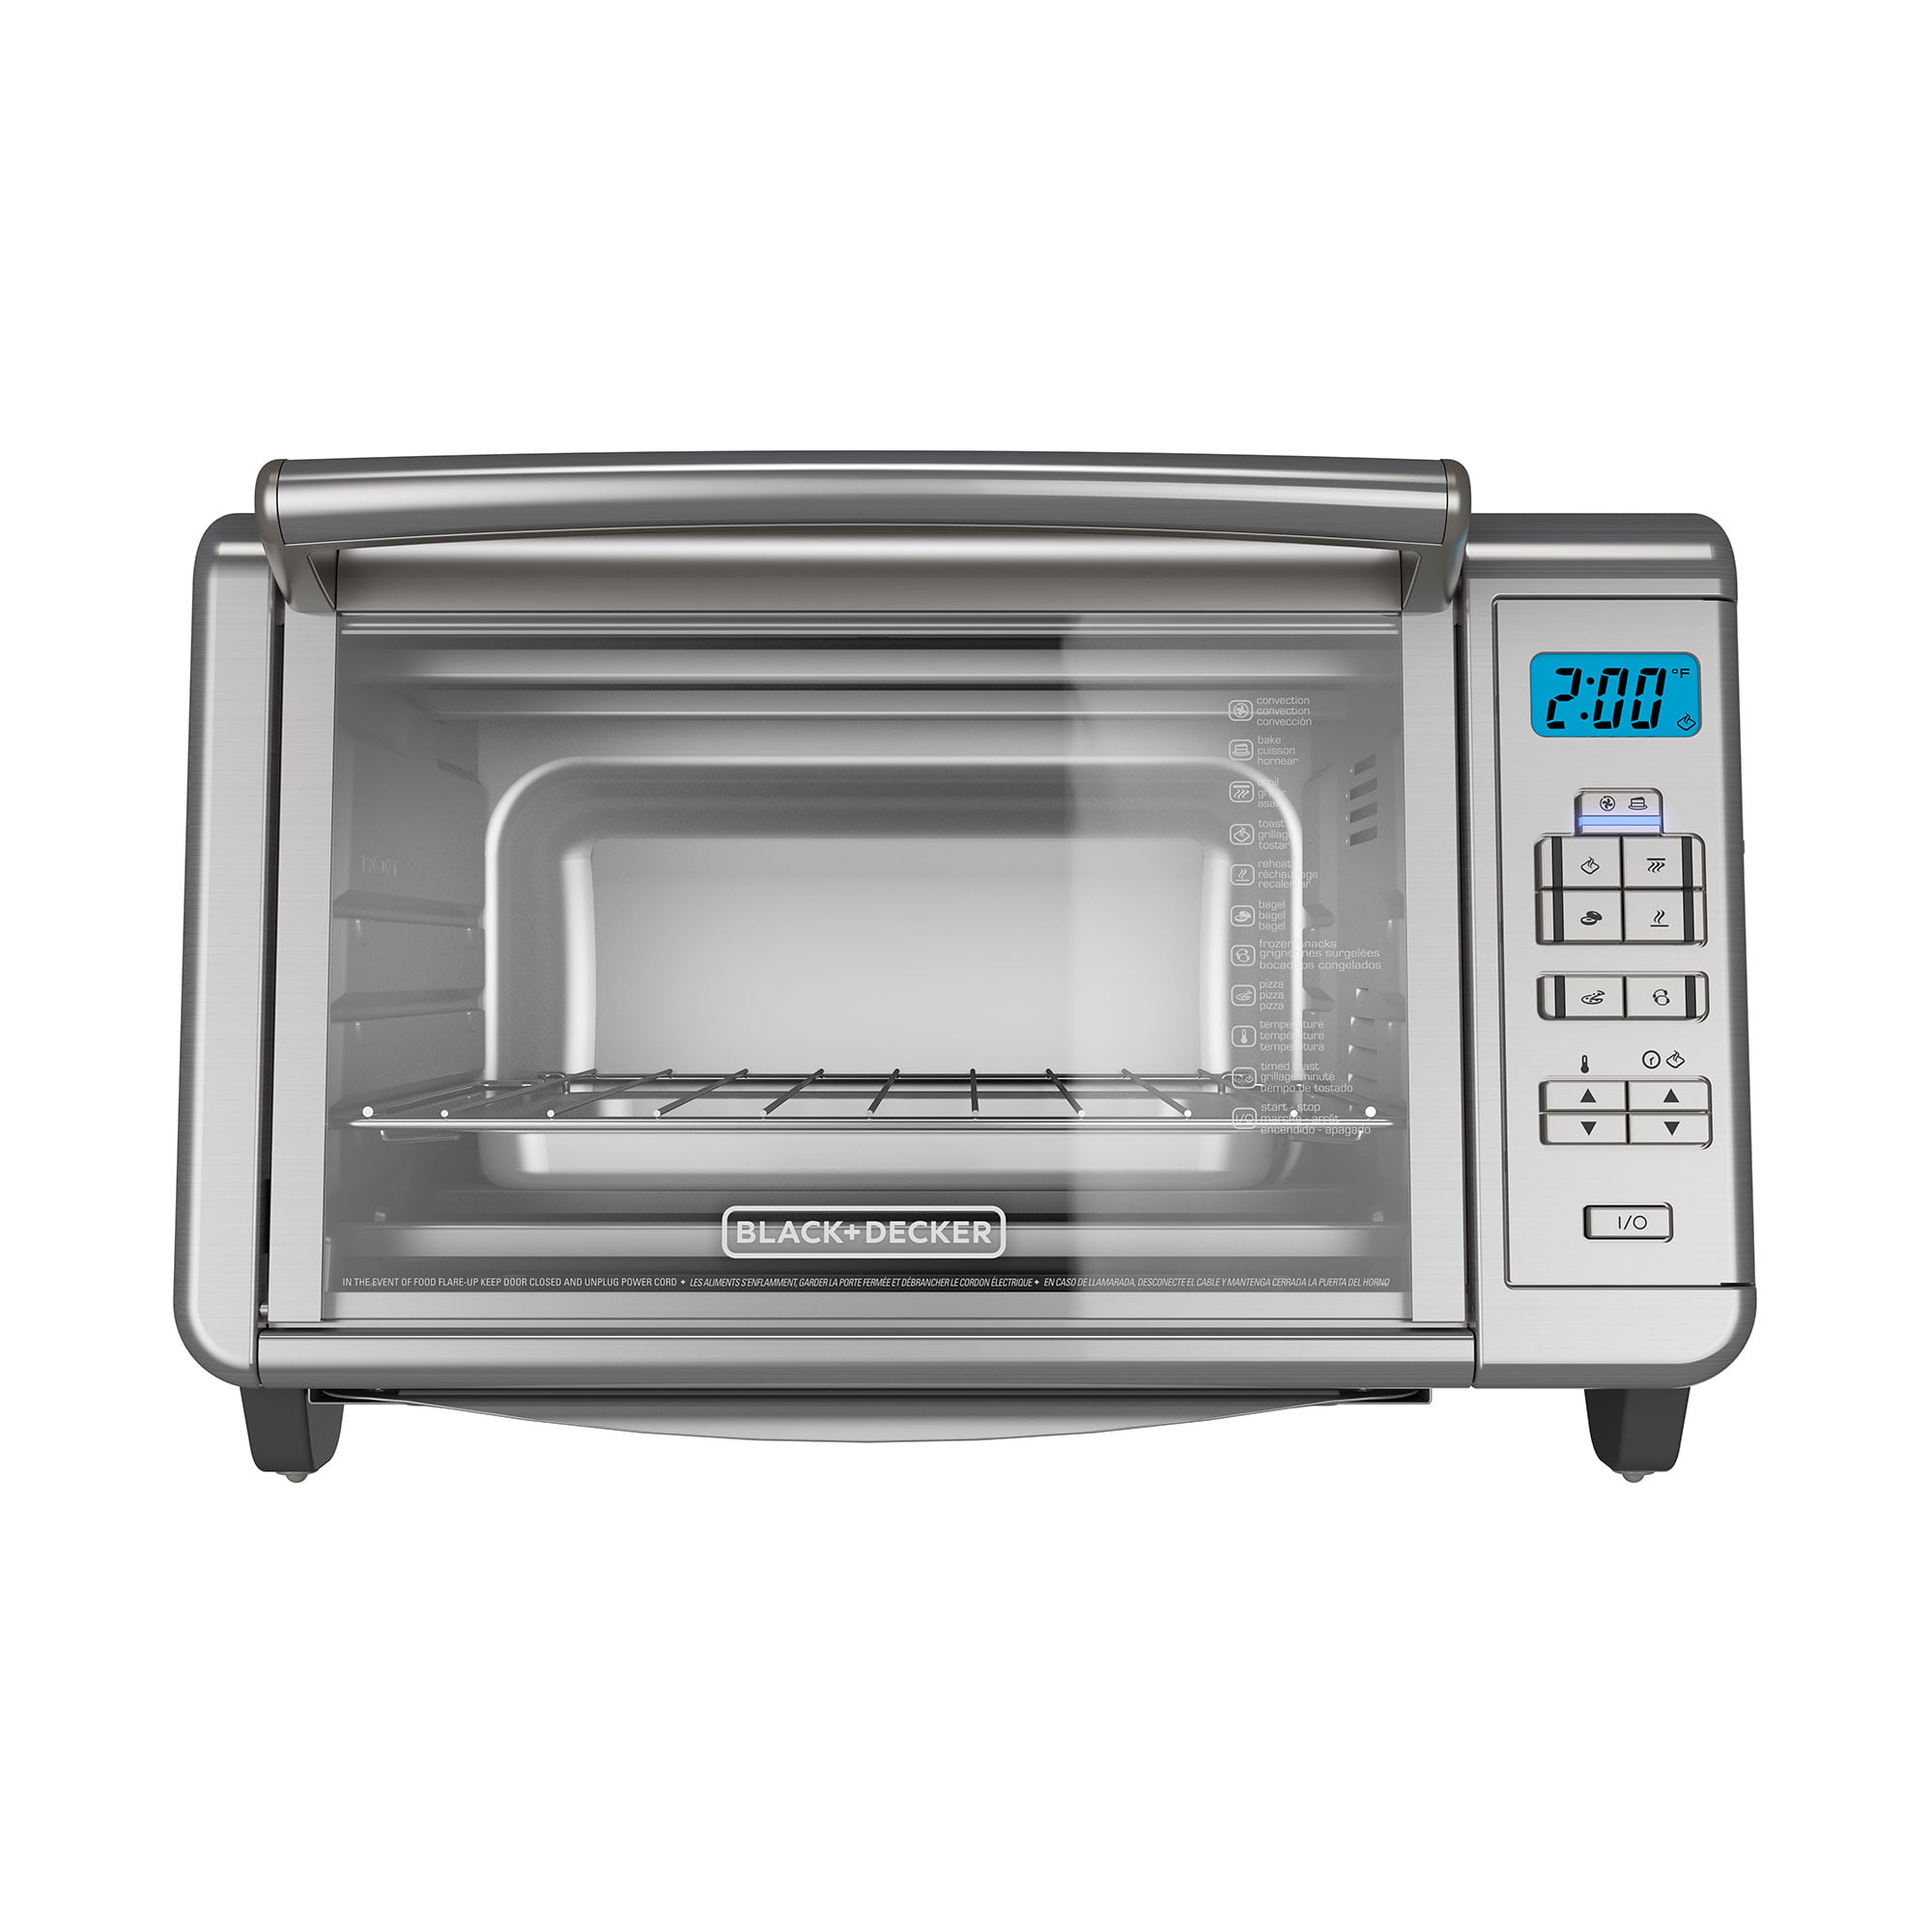 BLACK+DECKER 6-Slice Digital Convection Toaster Oven, Stainless Steel,  TO3280SSD 